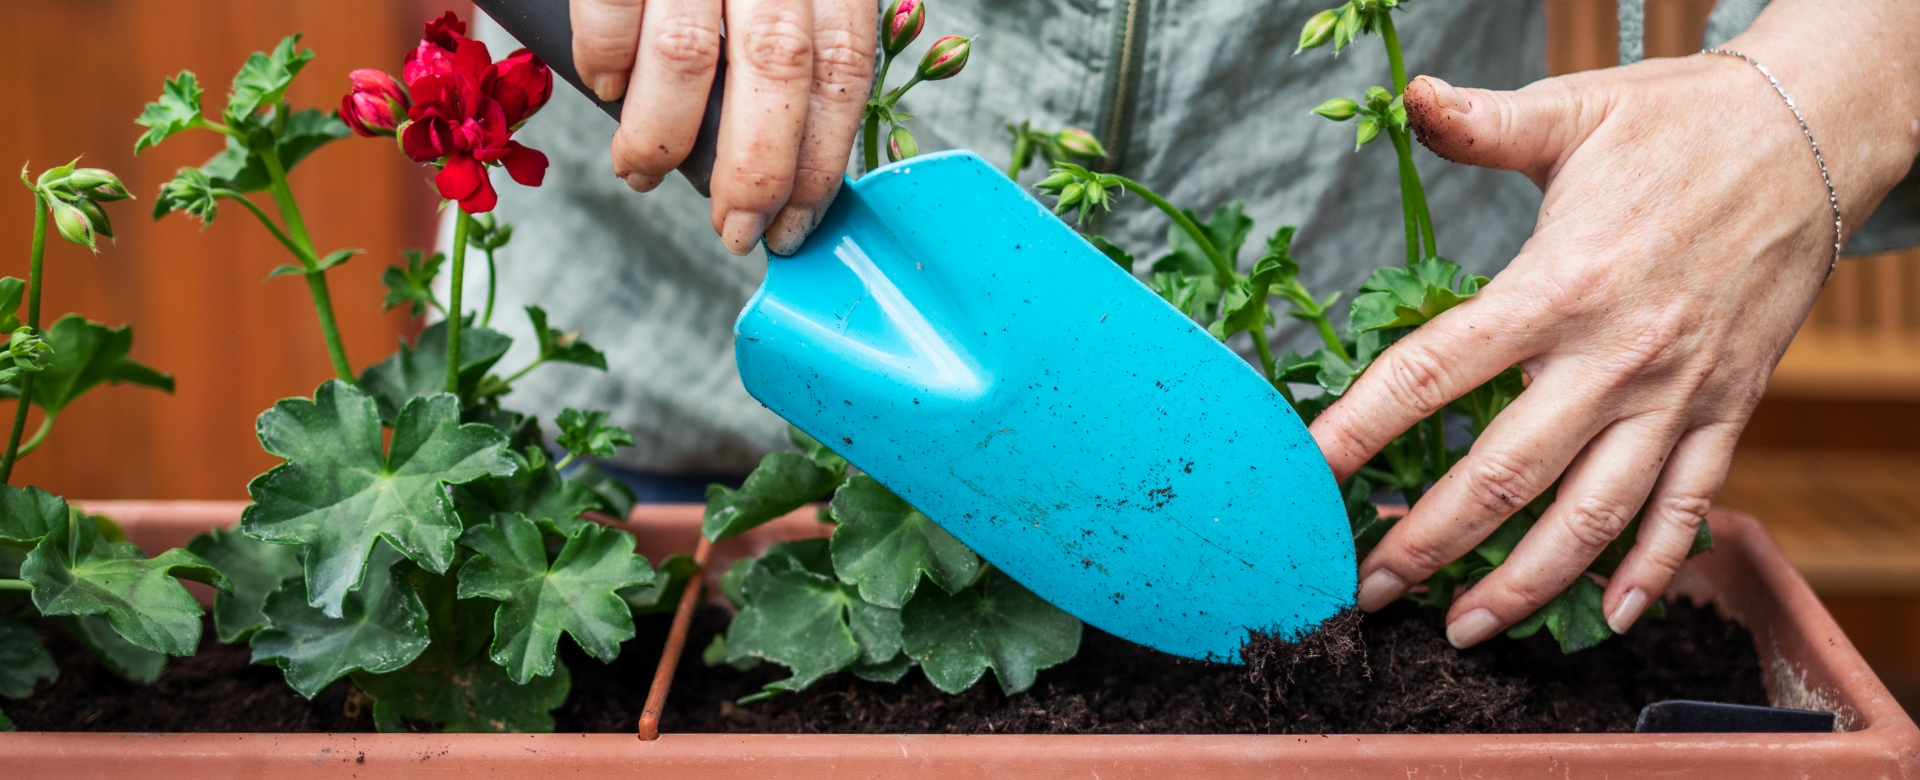 KEEP GARDEN CLEAN AND GREEN WITH USEFUL MAINTENANCE TIPS